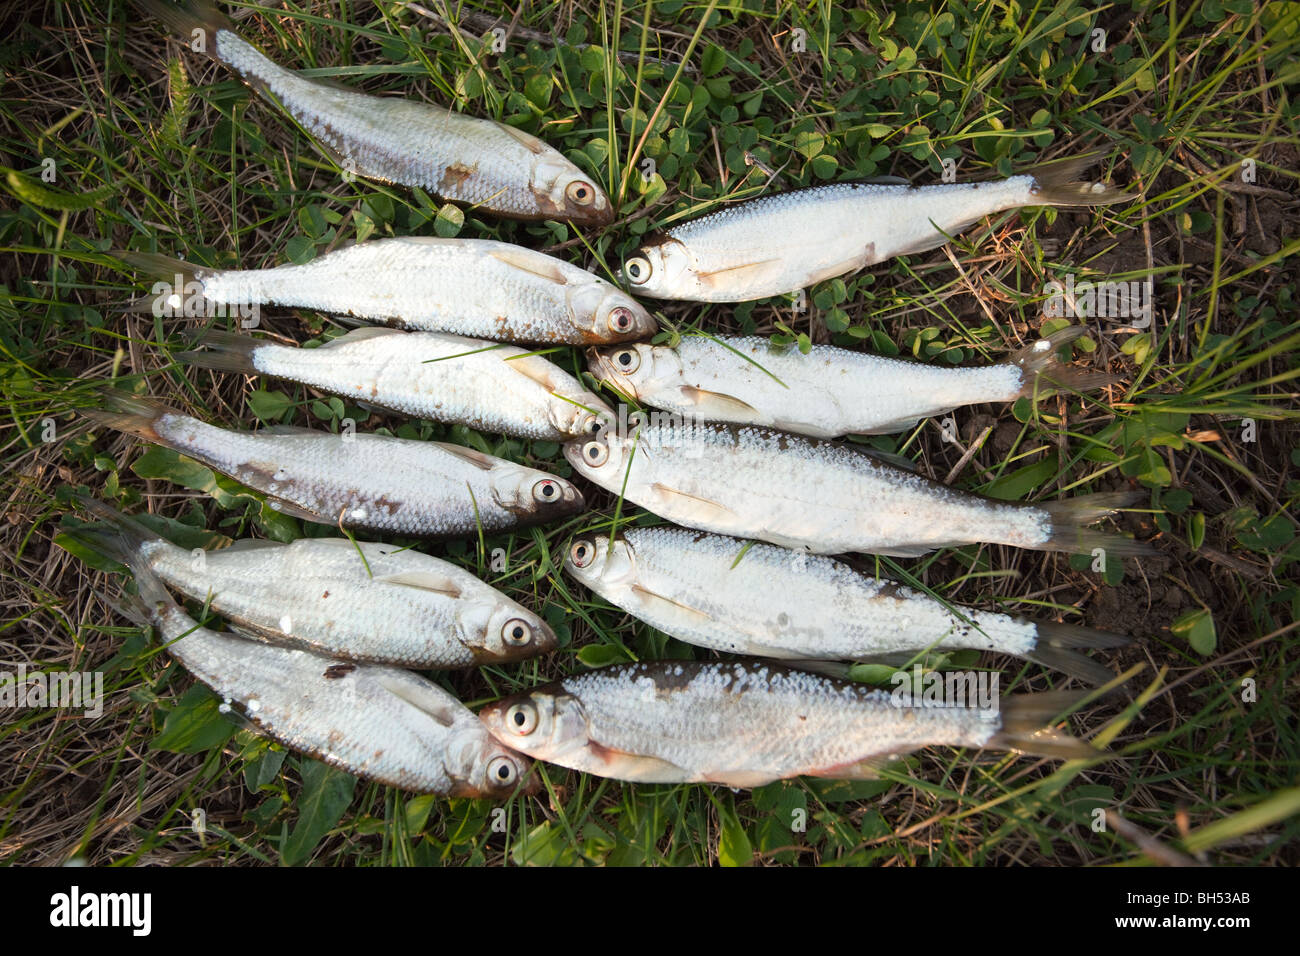 River fish caught by the fisherman. Stock Photo